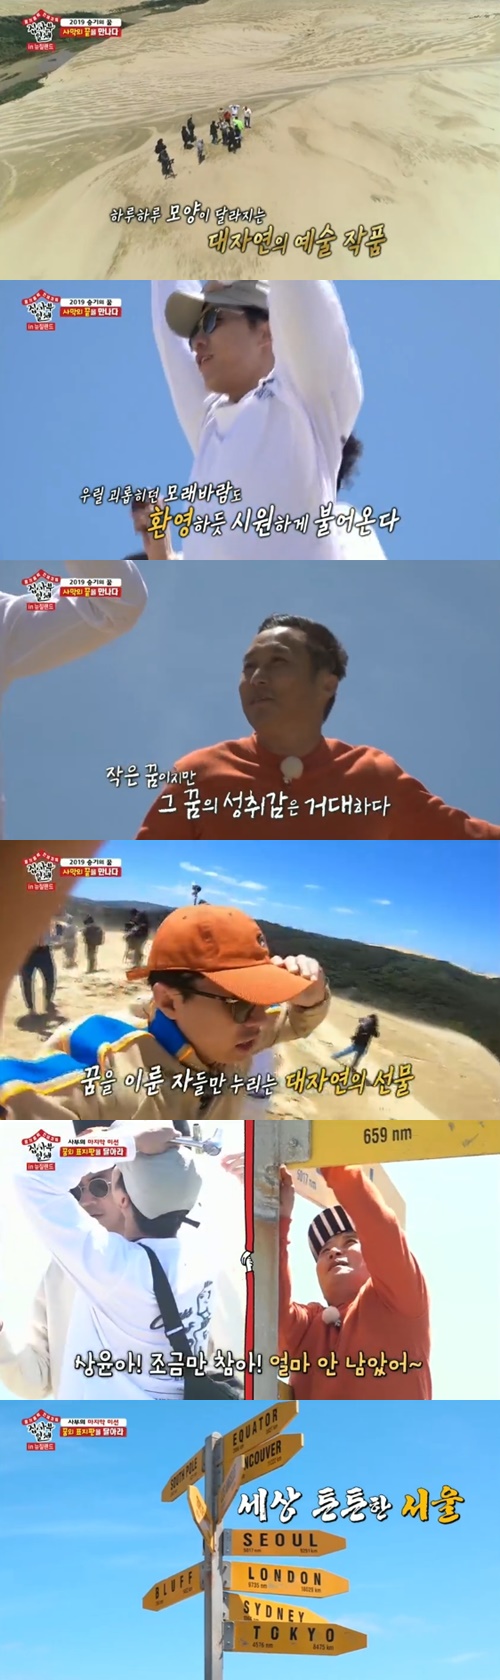 All The Butlers Kim Byung-man gave healing to his disciples with a great defense, a cross-desert sprint and a visit to Cape Fear Leinga.On SBS All The Butlers broadcast on the 22nd, Lee Seung-gi, Lee Sang-yoon, Yang Se-hyeong and Yook Sungjae visited the master Kim Byung-mans sickland.Kim Byung-man on the day began to dismantle the defense that Lee Sang-yoon had caught.Kim Byung-man scanned the Great Defensive once and succeeded in completely dismantling it with a few knife strokes, surprising the members.The fresh and ecstatic taste of the Great Defense impressed all the members, and there was a competition for taste expression.In particular, Yook Sungjae laughed, saying, Defense, beef, and pork taste appear at once.Kim Byung-man later told members that there was someplace I really want to take.Earlier, Lee Seung-gi, who appeared in Master Son Ye-jin, predicted a cross desert race with the goal of 2019.Kim Byung-man took his four pupils to the vast desert to achieve Lee Seung-gis goal; the members struggled up to the top of the steeply sloping desert.They walked for a long time, not giving up, especially after suffering from the sun and the sand, and finally they arrived at the end of the desert, and were amazed and impressed by the enormous sight.Lee Sang-yoon was surprised by the gift given by Mother Nature, saying, It is like a lie, Lee Seung-gi said, The view is amazing.Kim Byung-man then took his four disciples to Cape Fear Leinga.He said, I had a sign in the direction of Seoul at the time of shooting Jungles Law, but the wind was gone.One of the goals was to put the Seoul sign again, he said.Photo: SBS broadcast screen